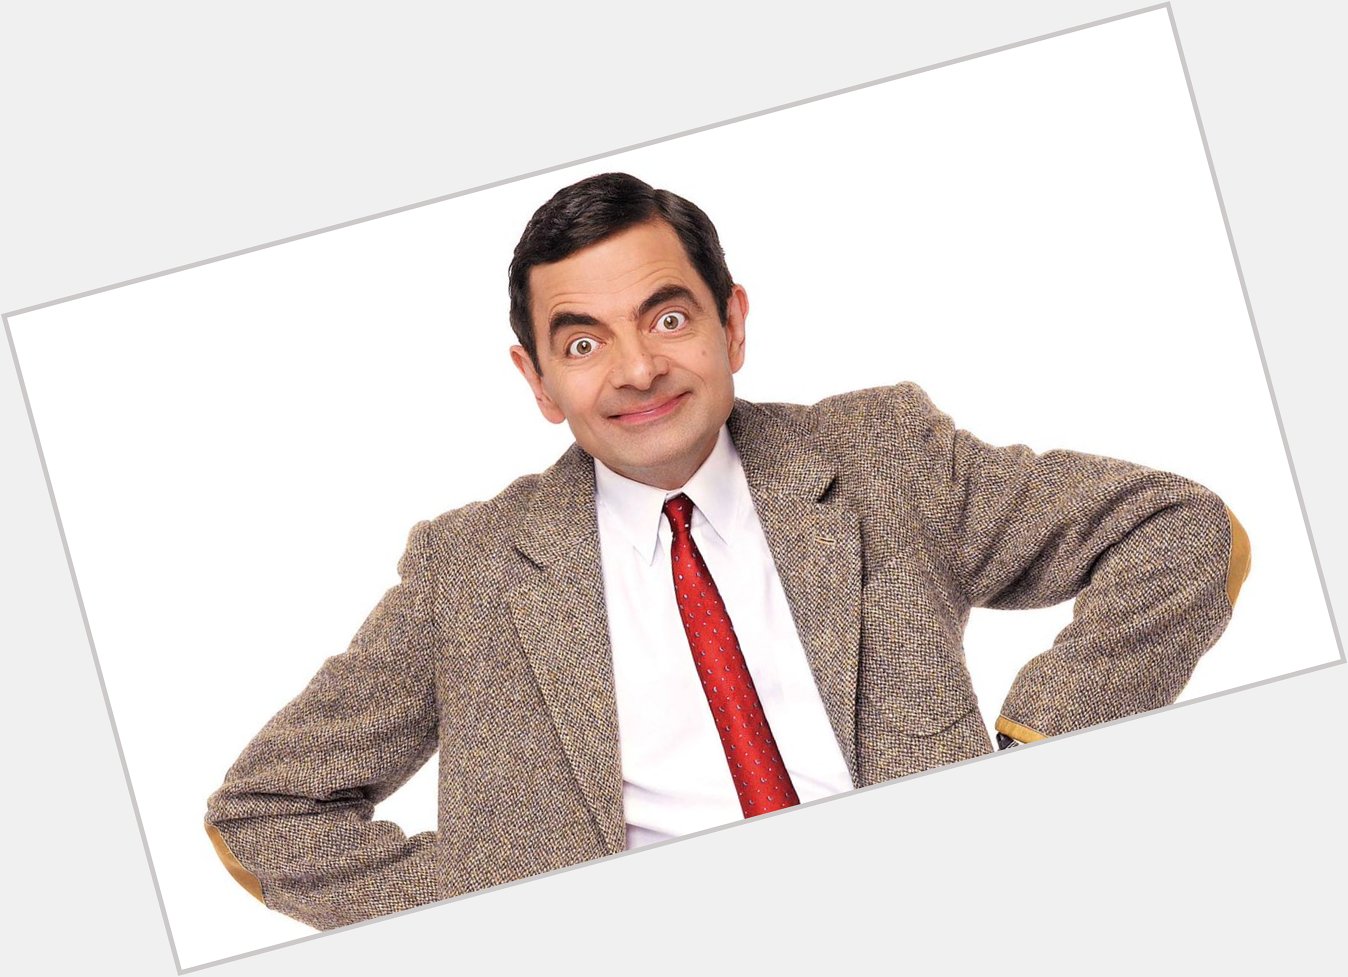 Happy Birthday to Rowan Atkinson, the man who made millions laugh without speaking 